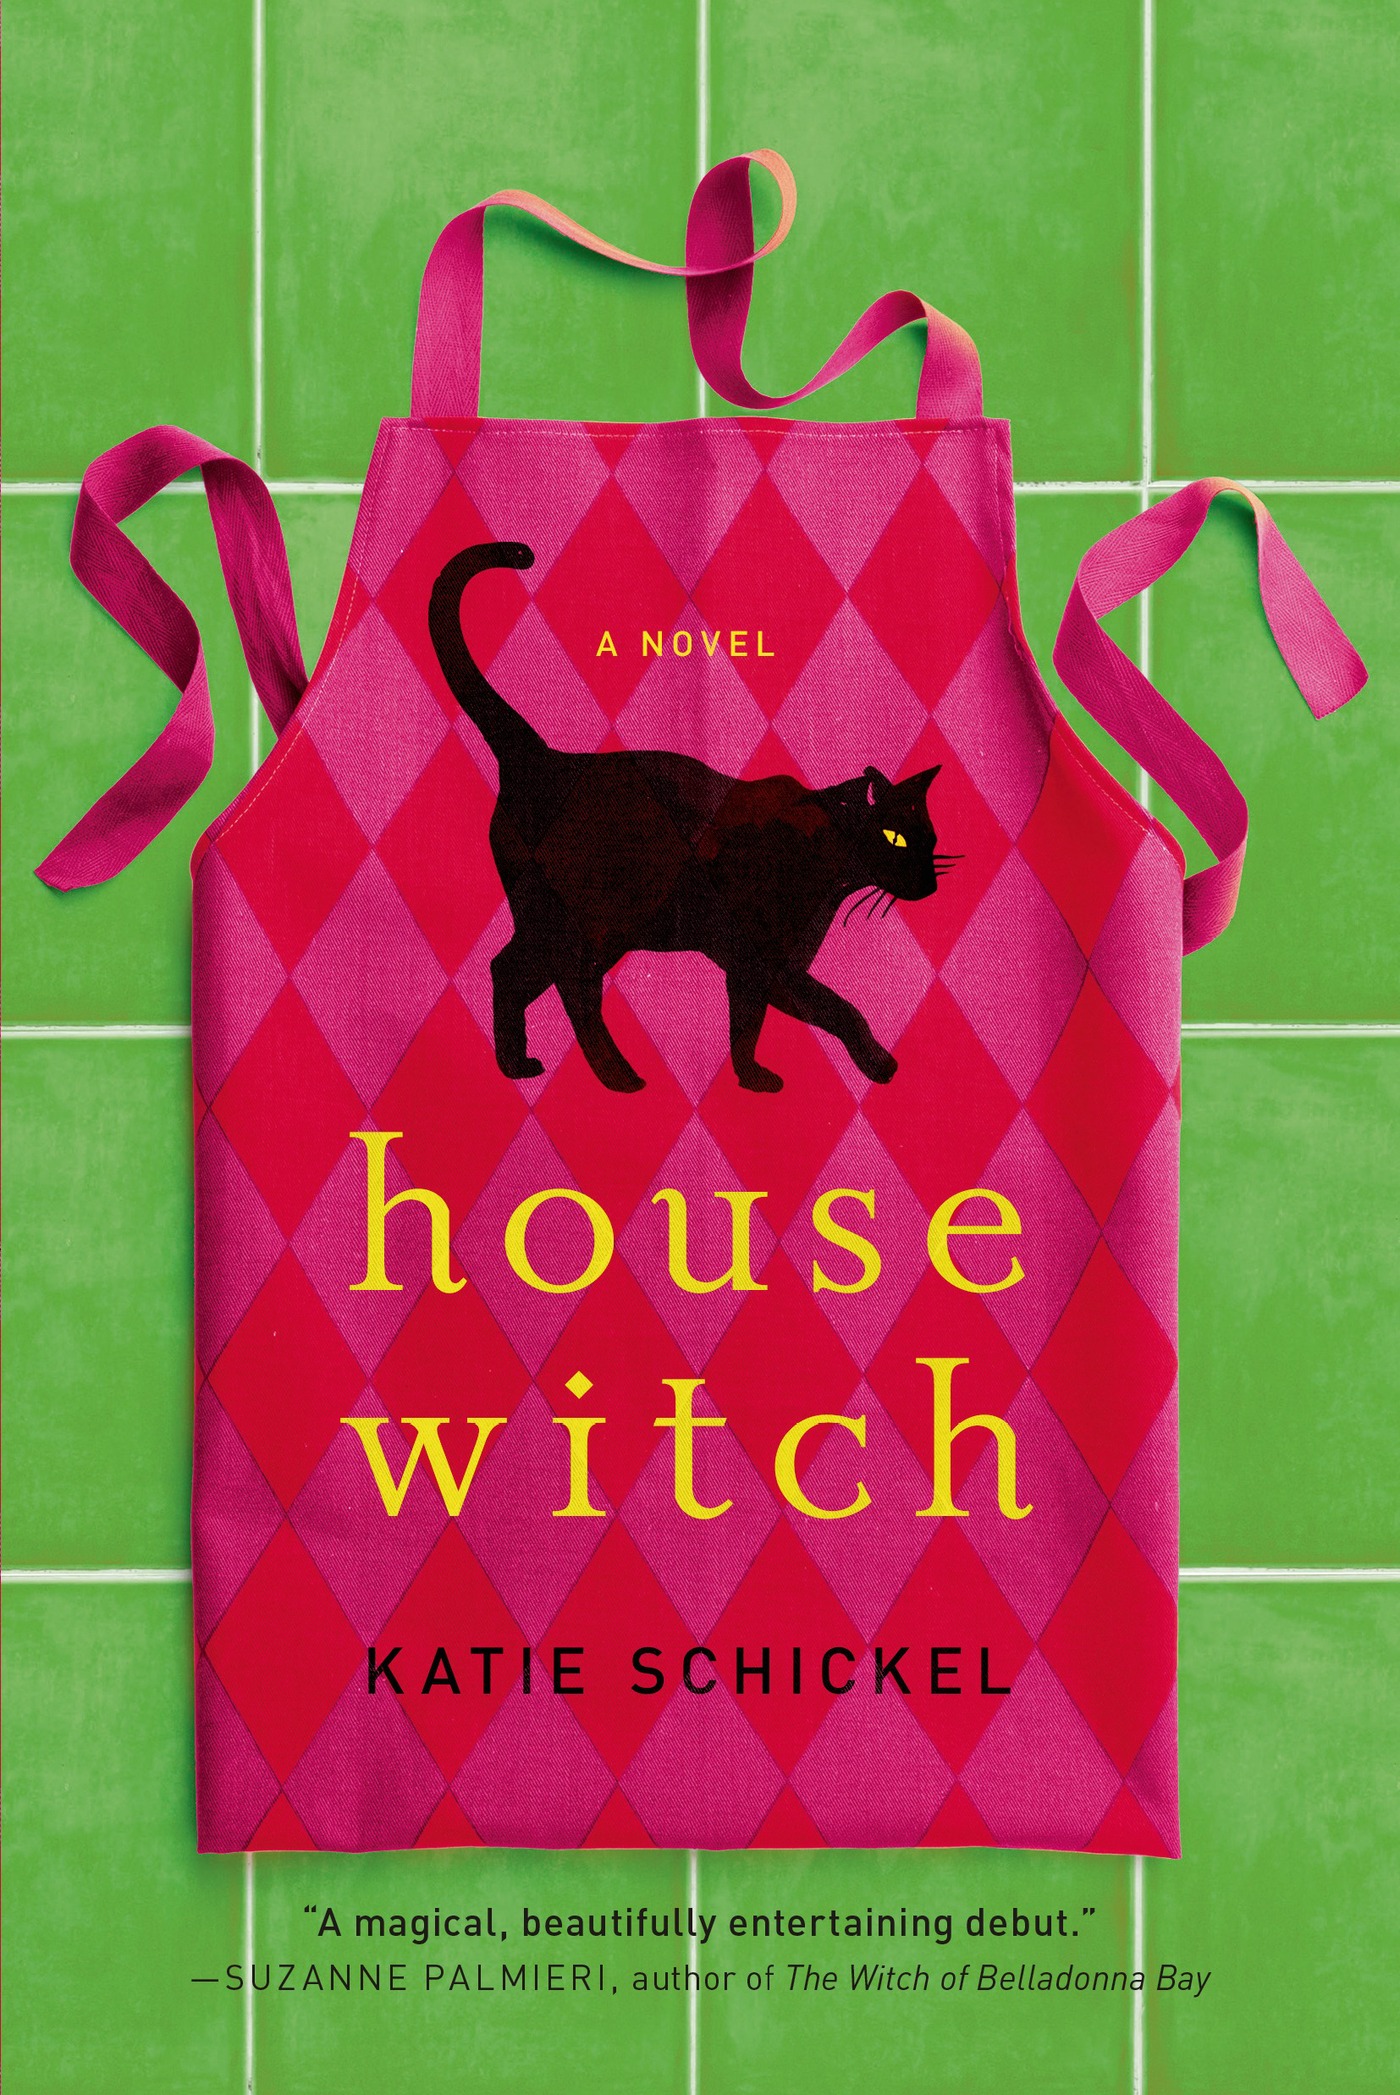 Housewitch : A Novel by Katie Schickel